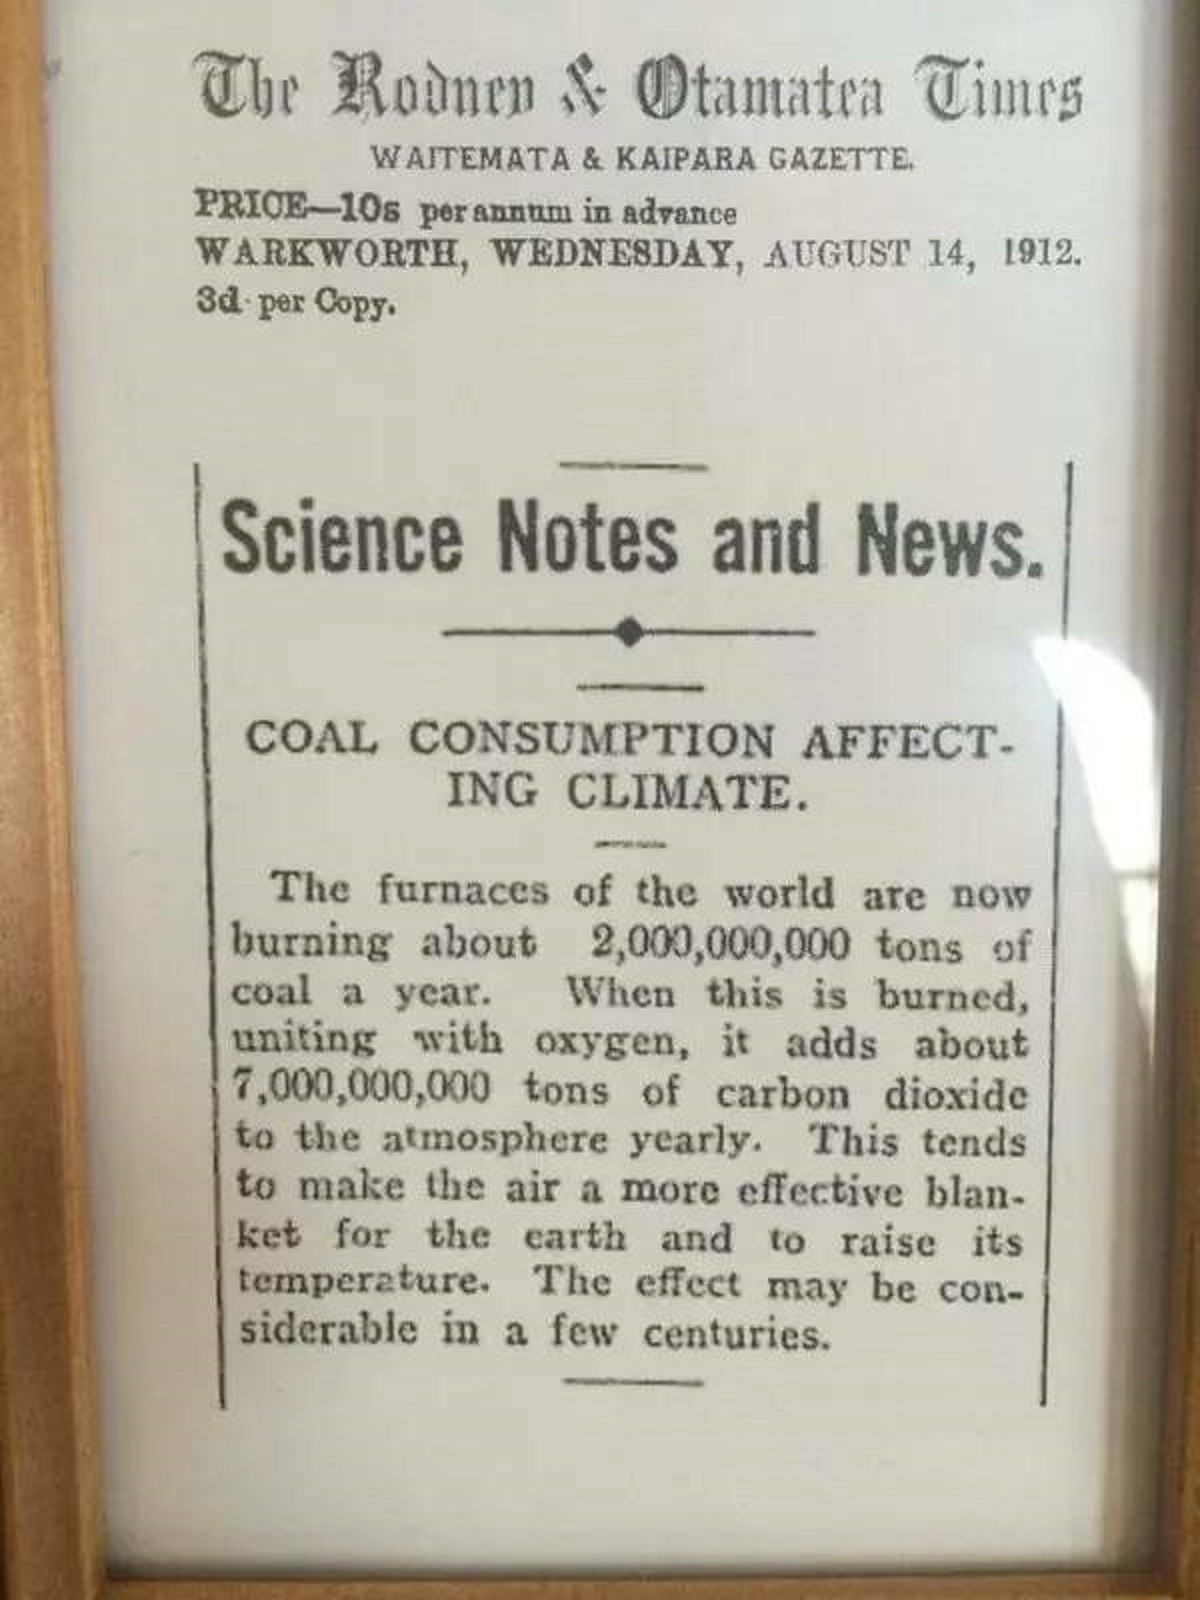 fascinating photos - coal consumption affecting climate 1912 - The Rodnen & Otamatea Times Waitemata & Kaipara Gazette, Price10s per annum in advance Warkworth, Wednesday, . 3d per Copy. Science Notes and News. Coal Consumption Affect Ing Climate. The fur